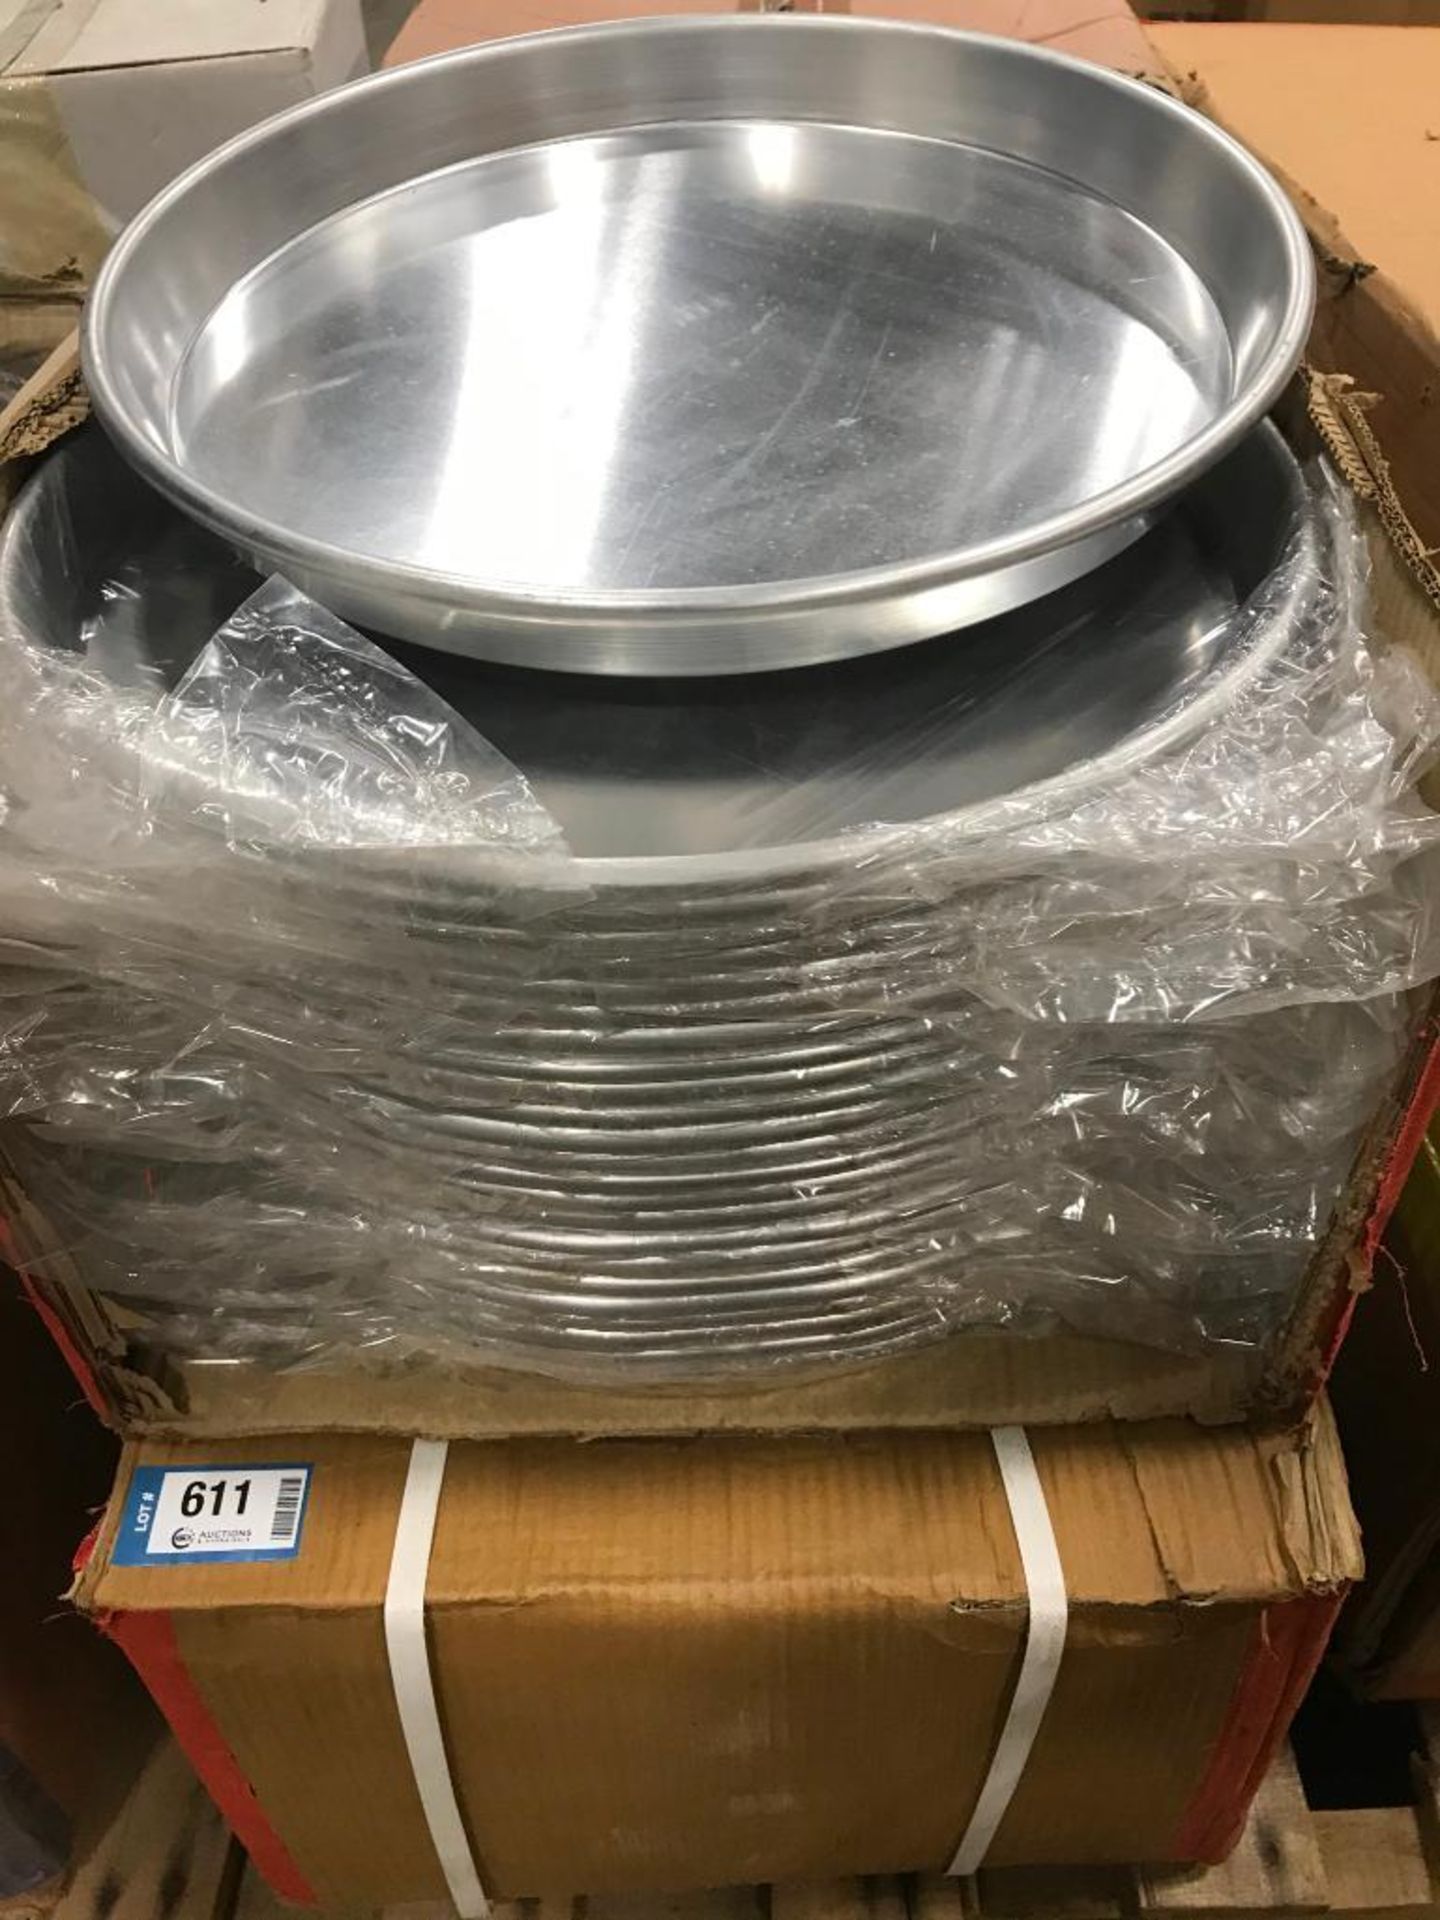 TWO CASES 15" PIZZA PAN - 24 PANS PER CASE - NEW - Image 3 of 3